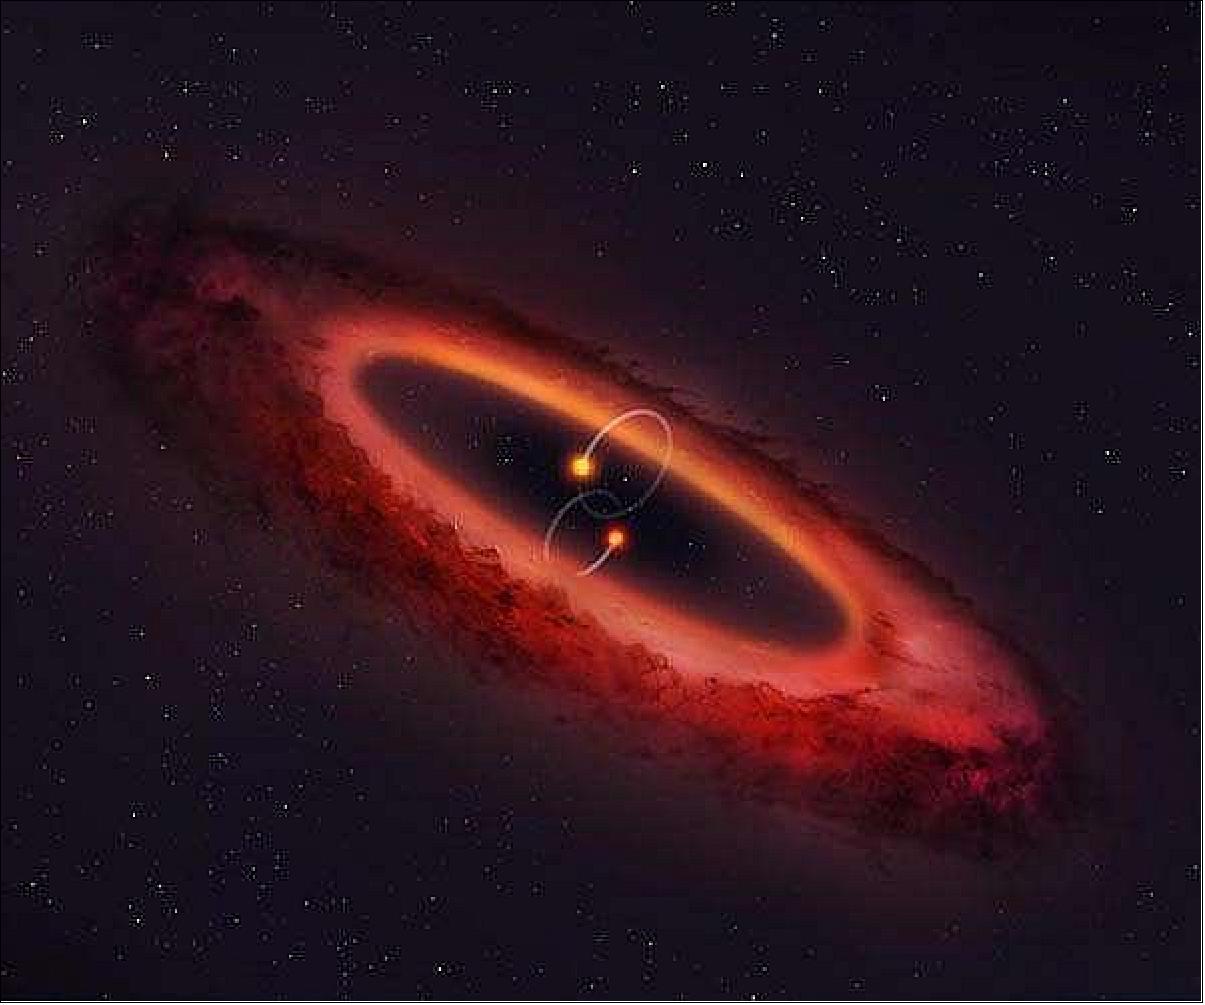 Figure 108: An artist’s impression of a view of the HD 98800BaBb binary star system and the surrounding disk (image credit: Mark Garlick, University of Warwick)